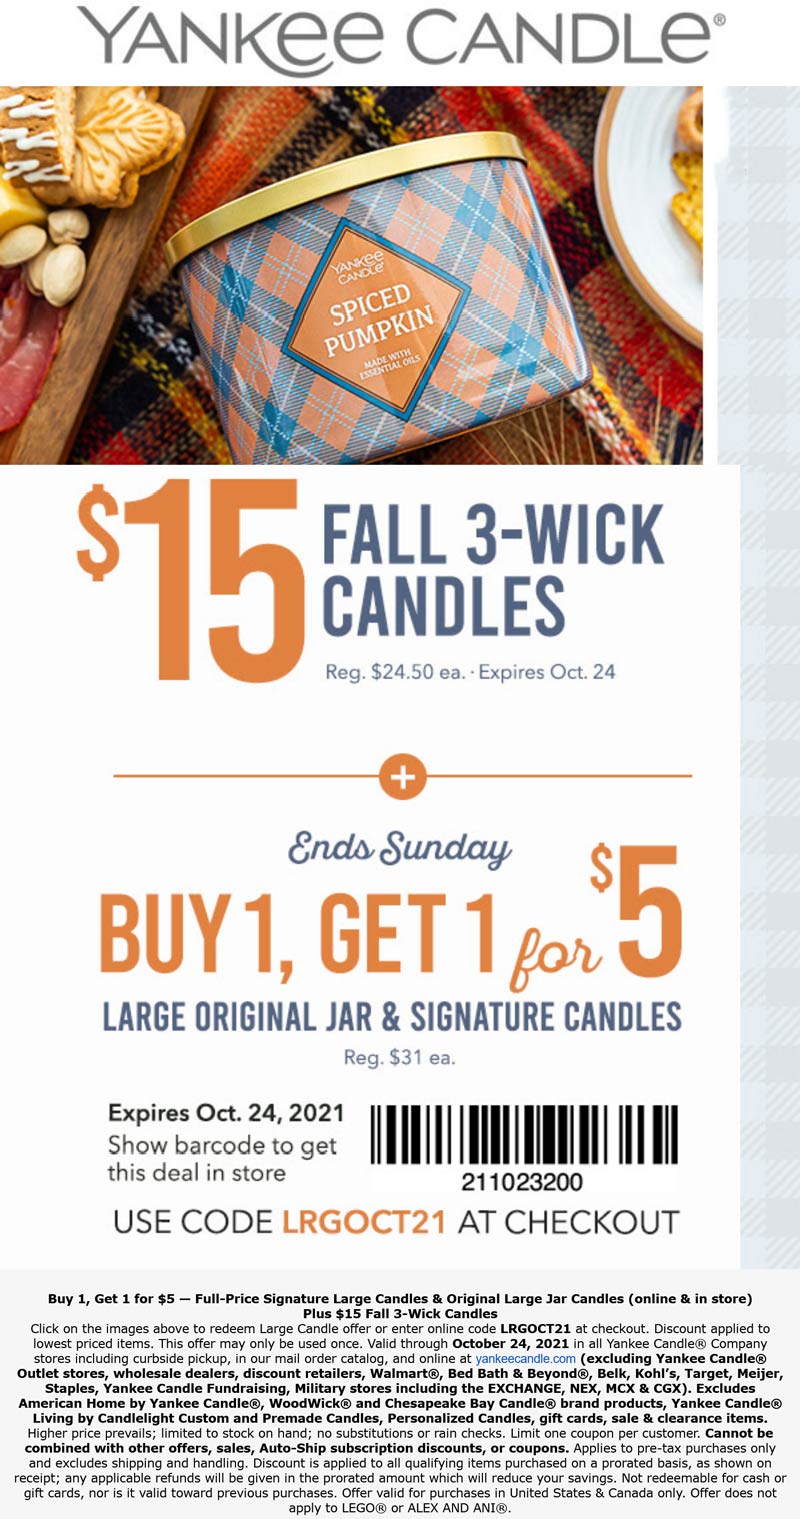 Yankee Candle stores Coupon  Second large candle $5 at Yankee Candle, or online via promo code LRGOCT21 #yankeecandle 